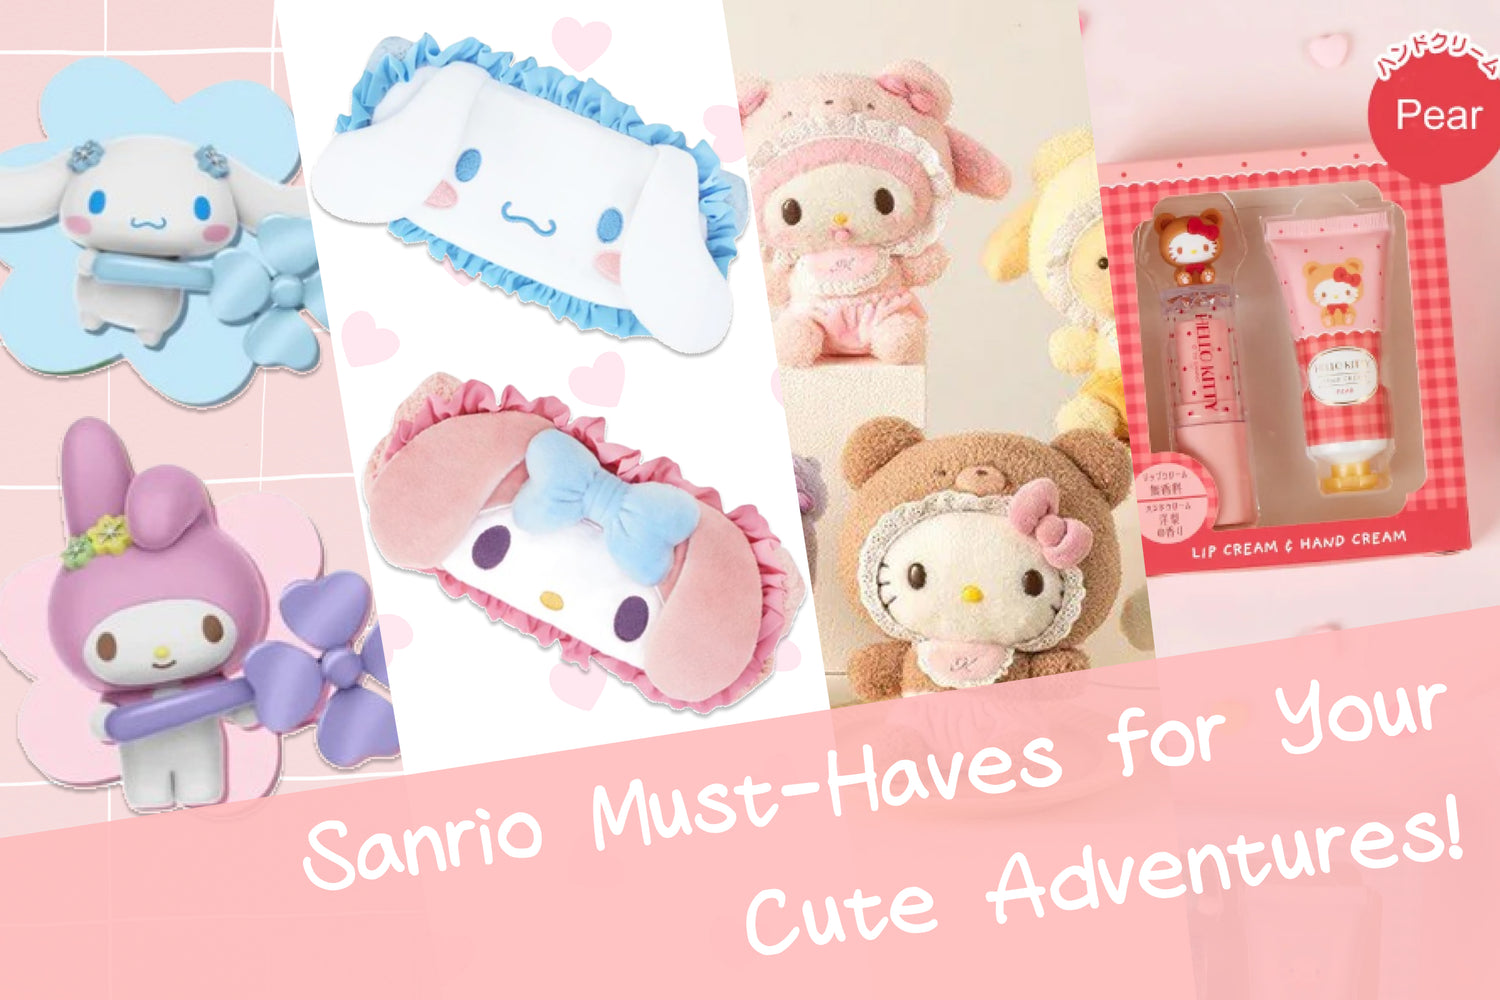 Sanrio Travel Must-Haves for Your Cute Adventures!